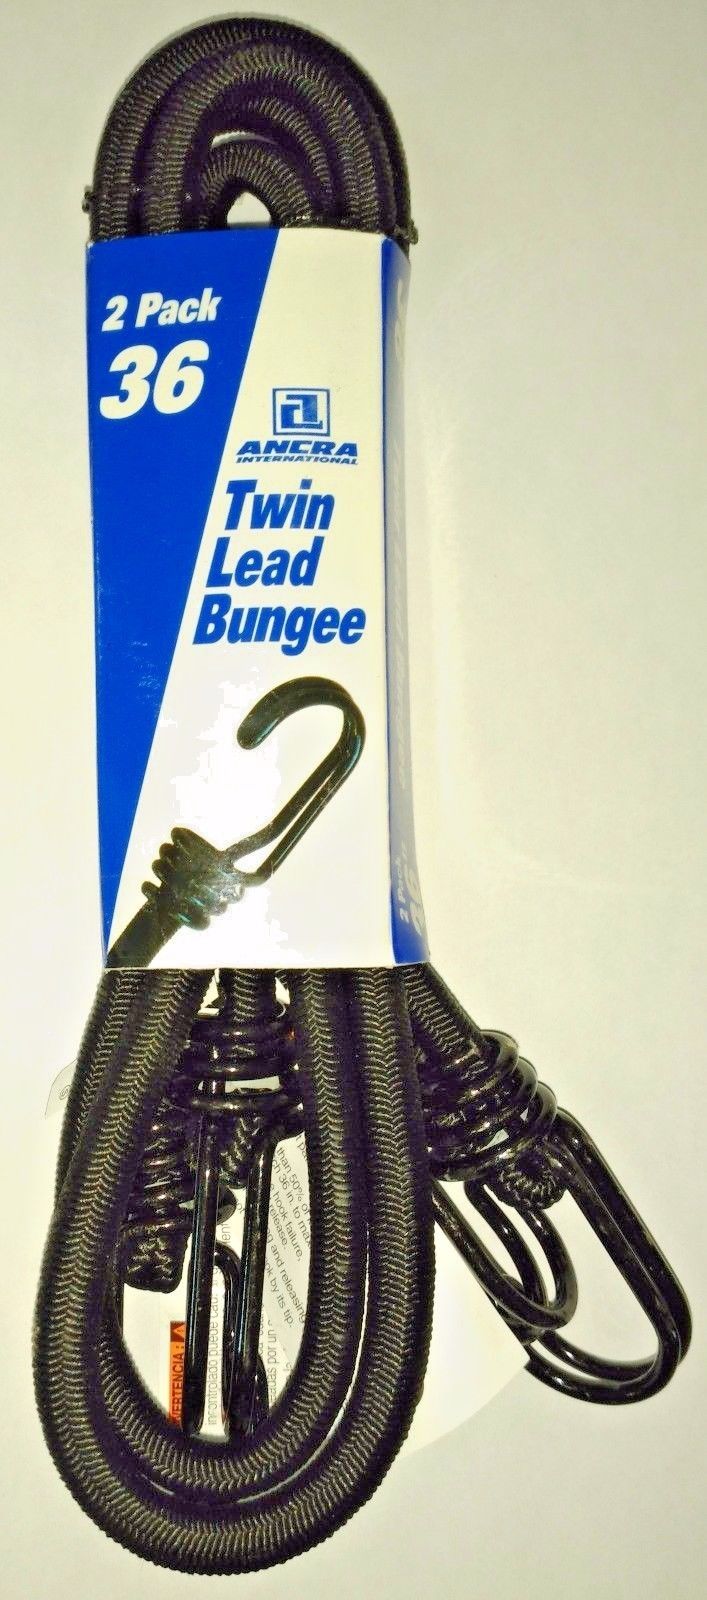 Ancra 95739 Twin Lead Bungee Cords, Black 2-Pack 36-Inch